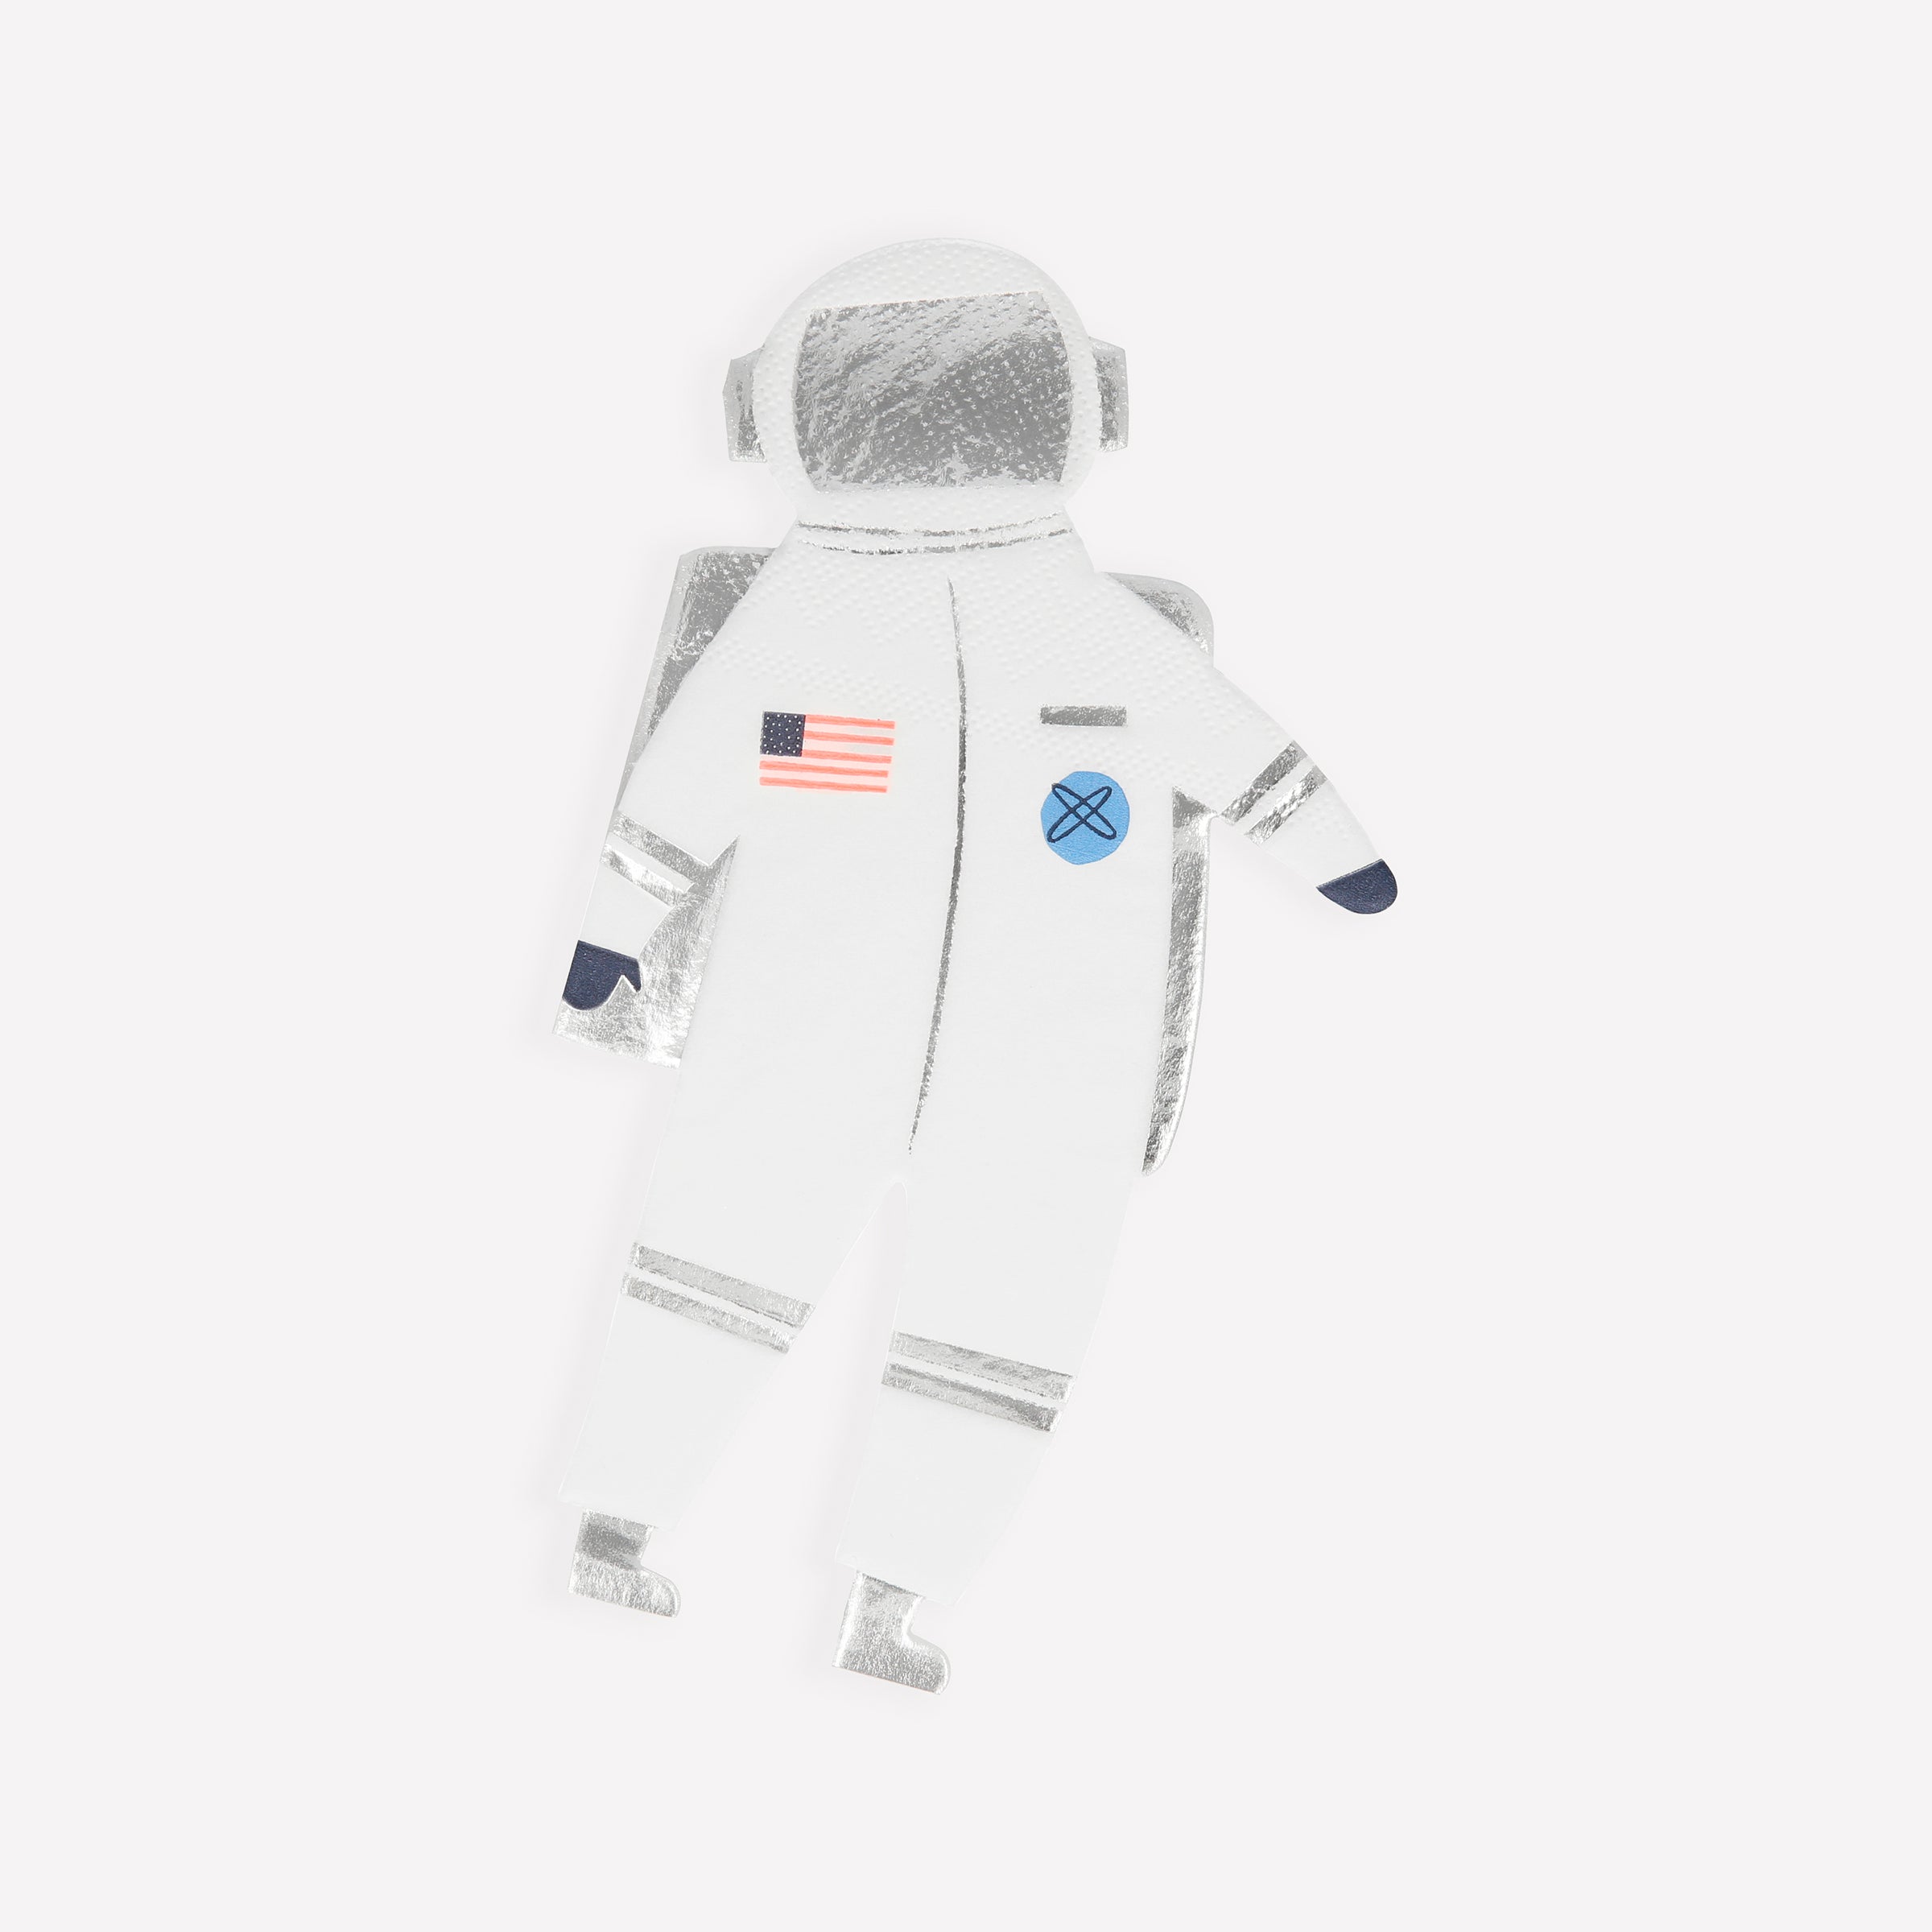 Make a kids birthday party look amazing with our spaceman napkins, the perfect party napkins for kids who love space.